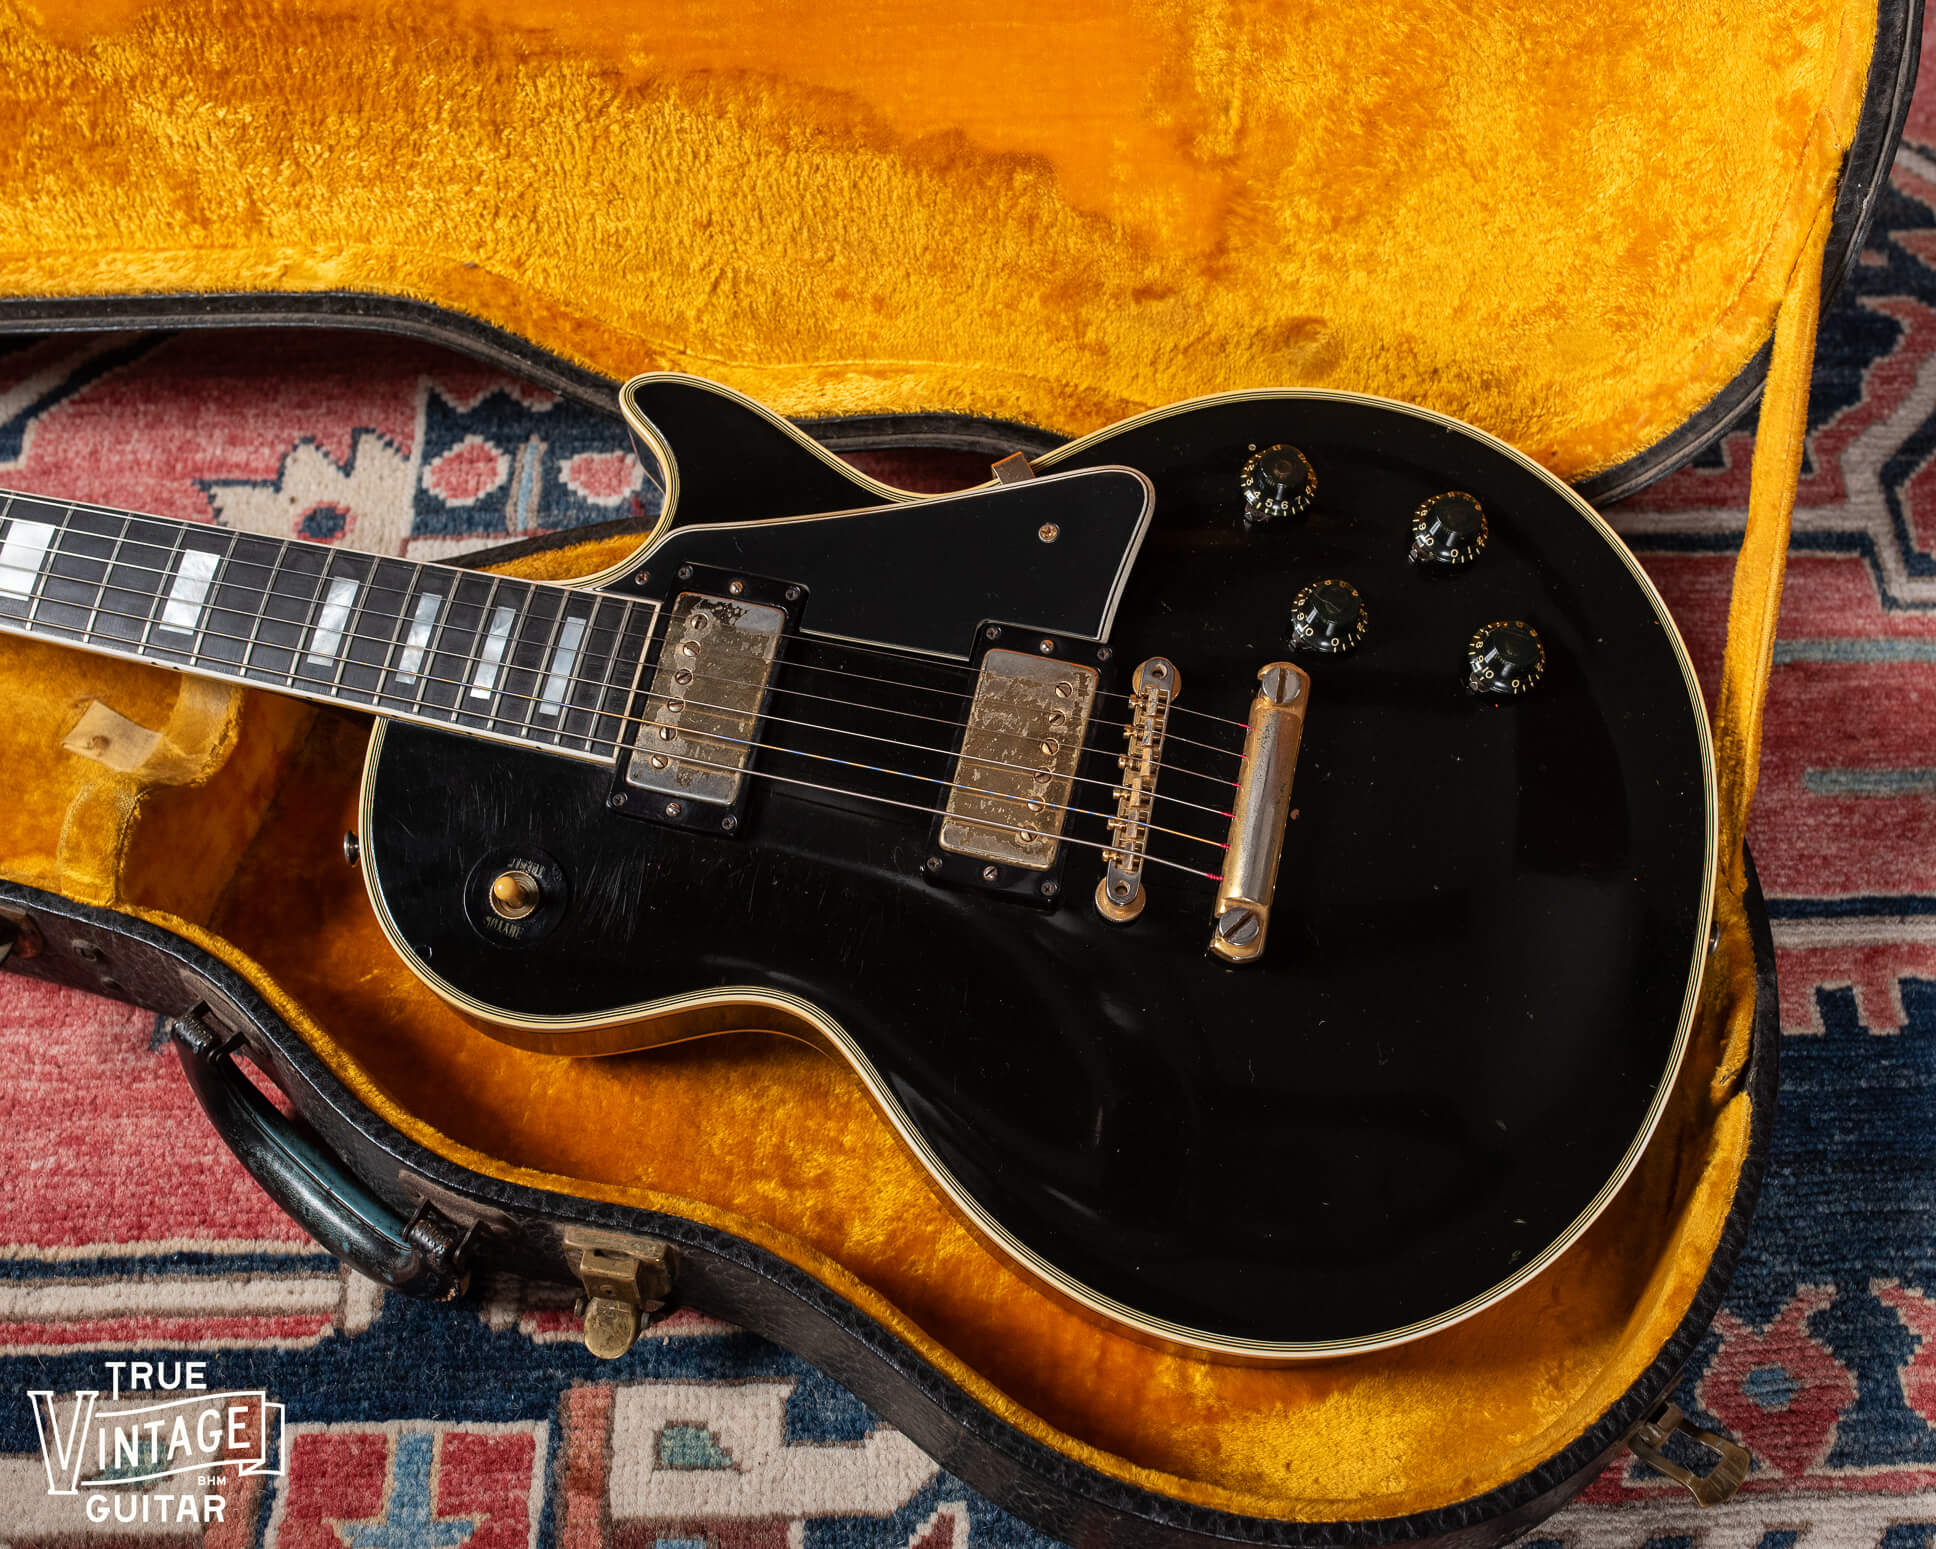 Black Gibson Les Paul guitar with two pickups made in 1958